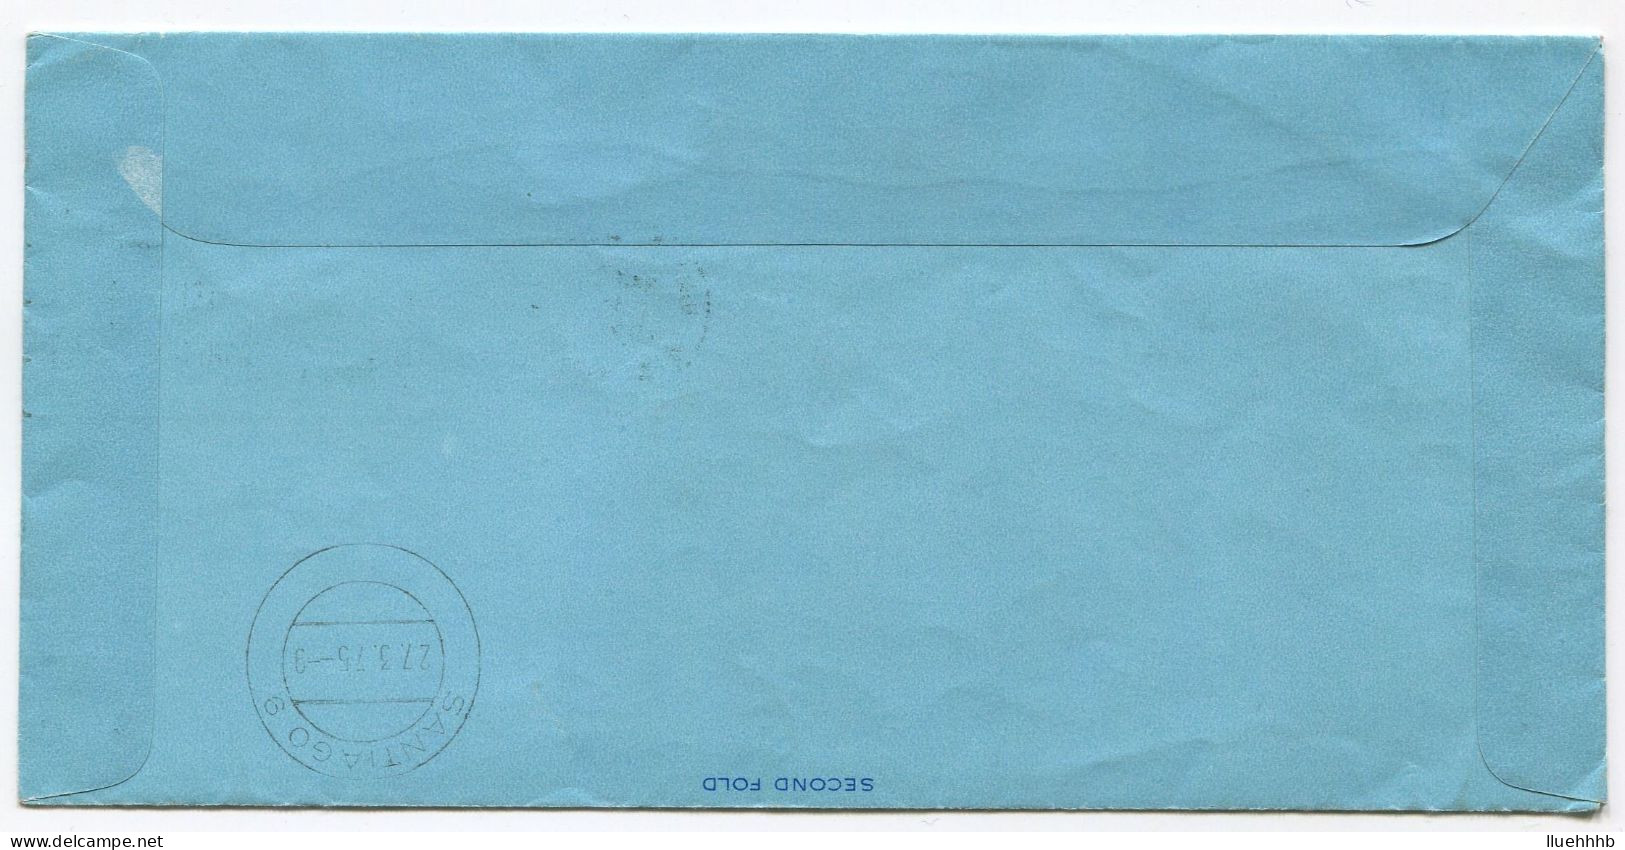 UNITED NATIONS: 1975 UC12 18c Aerogramme Sent To CHILE - Poste Aérienne